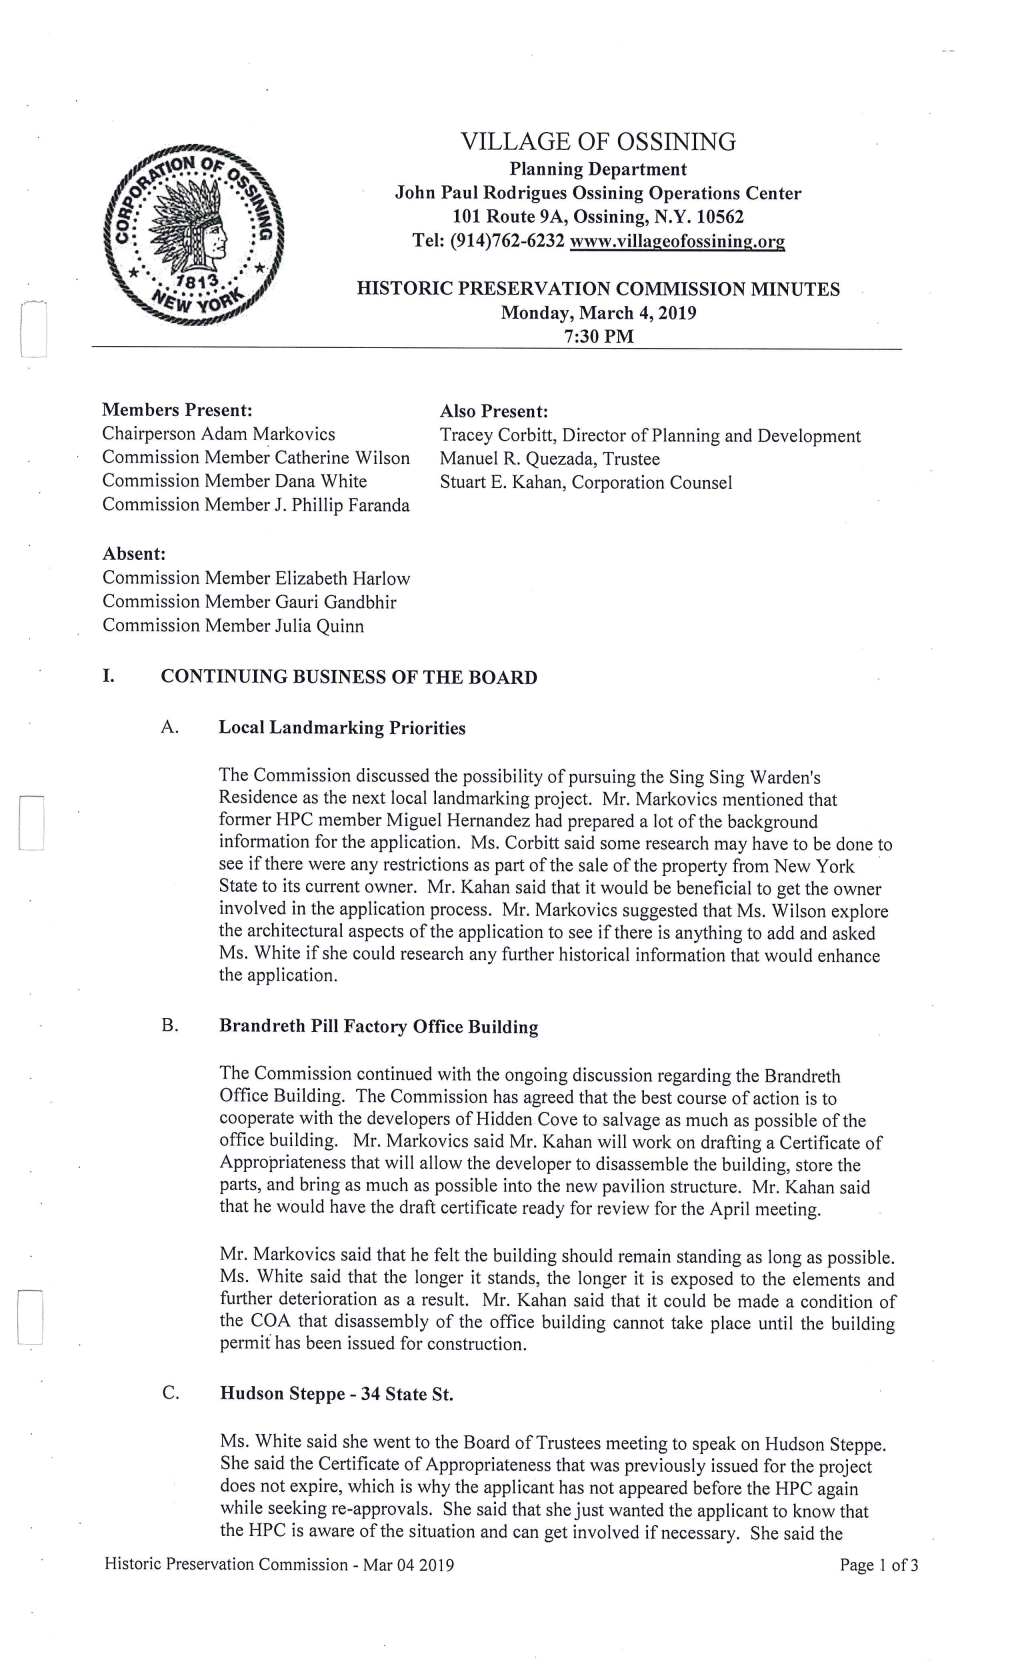 HISTORIC PRESERVATION COMMISSION MINUTES Monday, March 4, 2019 7:30 PM